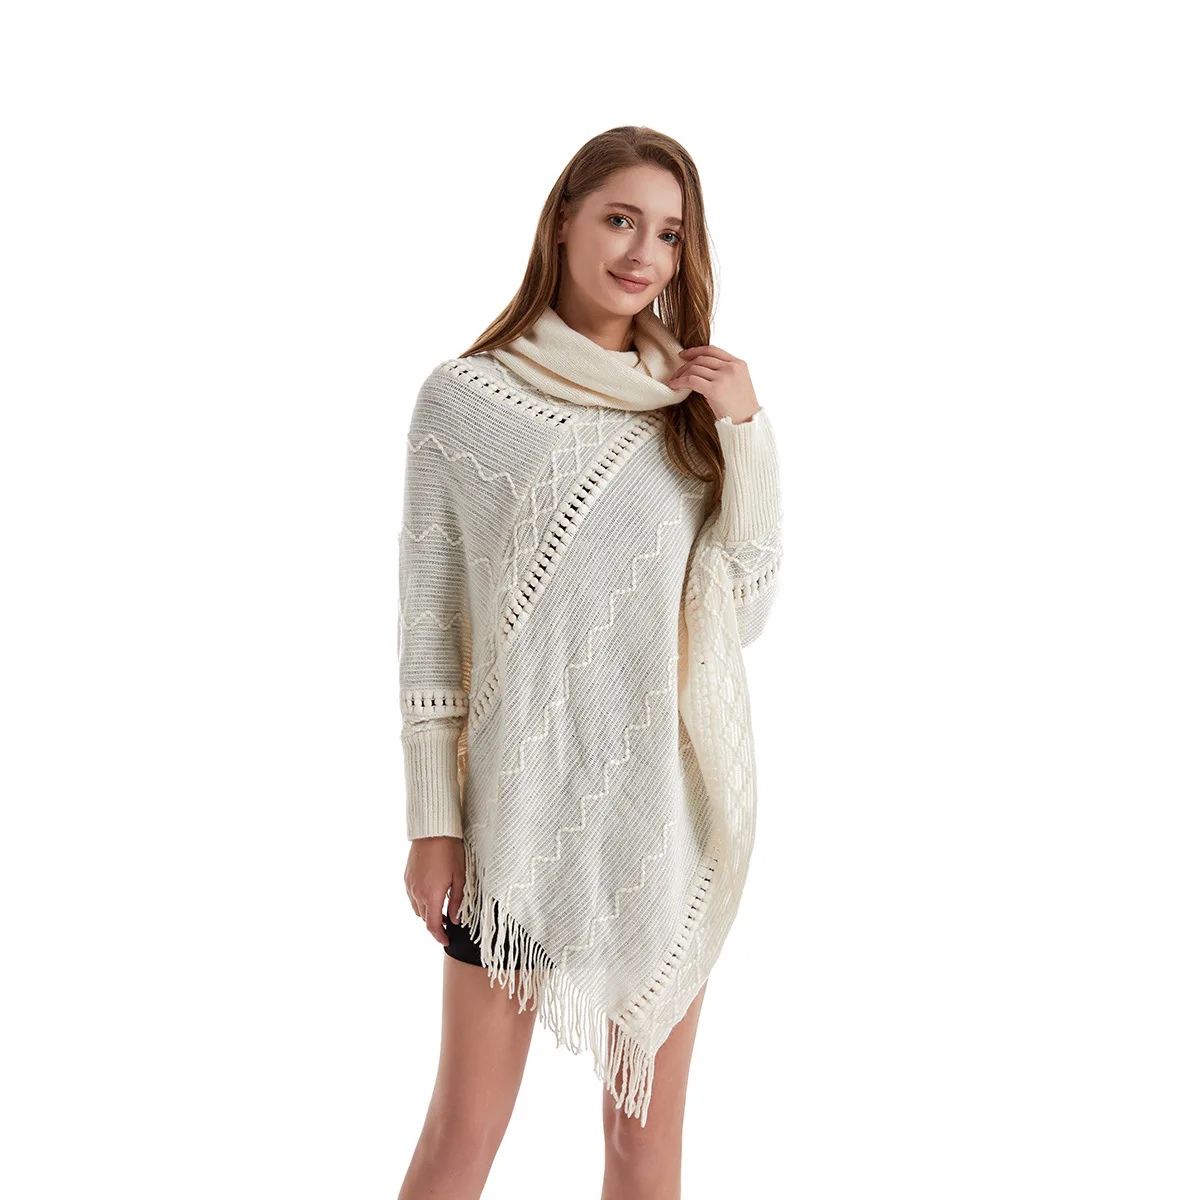 Women Spring Autumn Shawl Lady Knitted Wrap Solid Color Pullover with Sleeves Loose Turtleneck Sweater with Tassels Fall Poncho